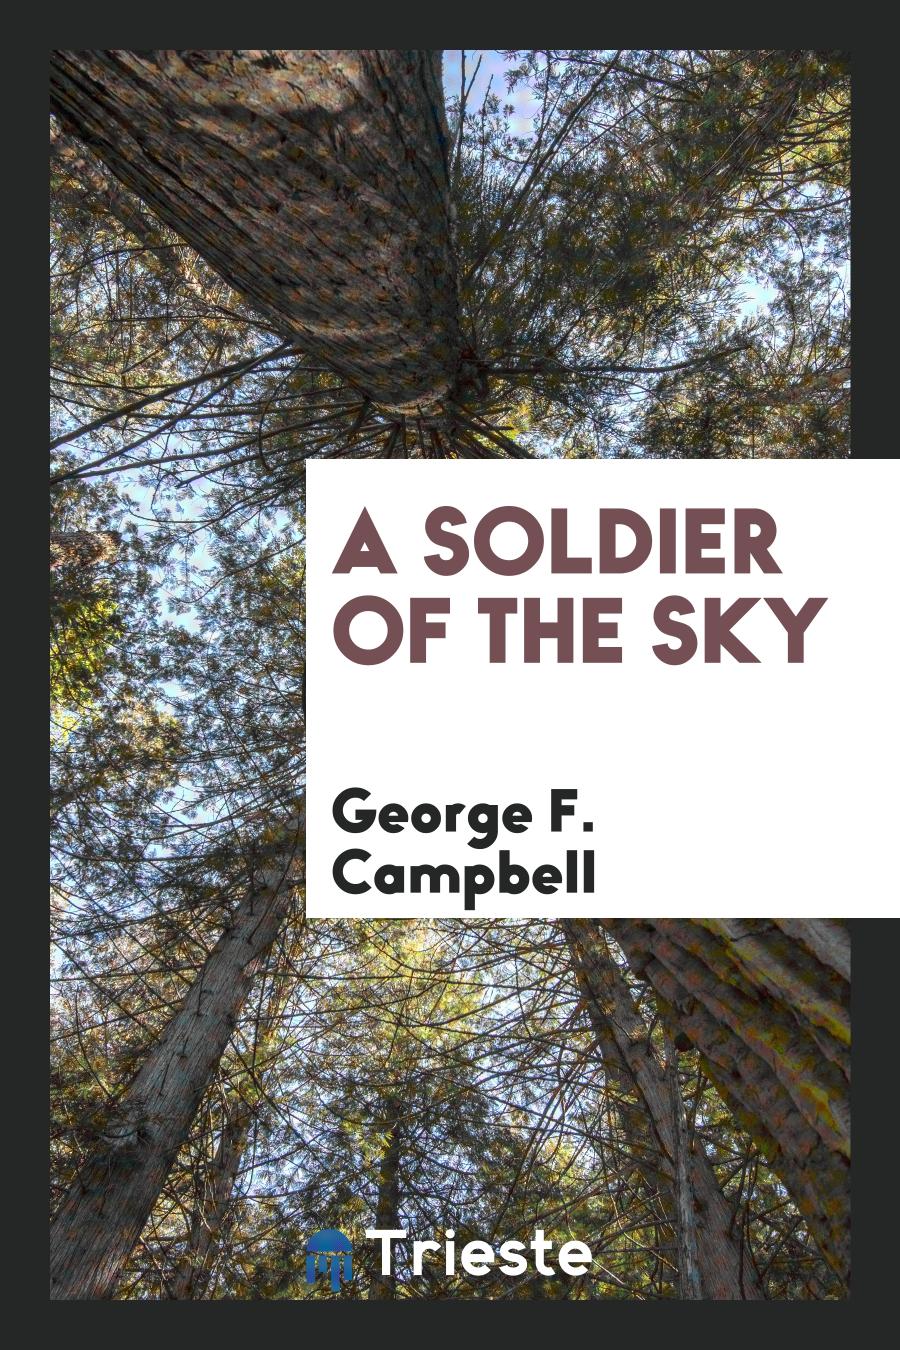 A Soldier of the Sky